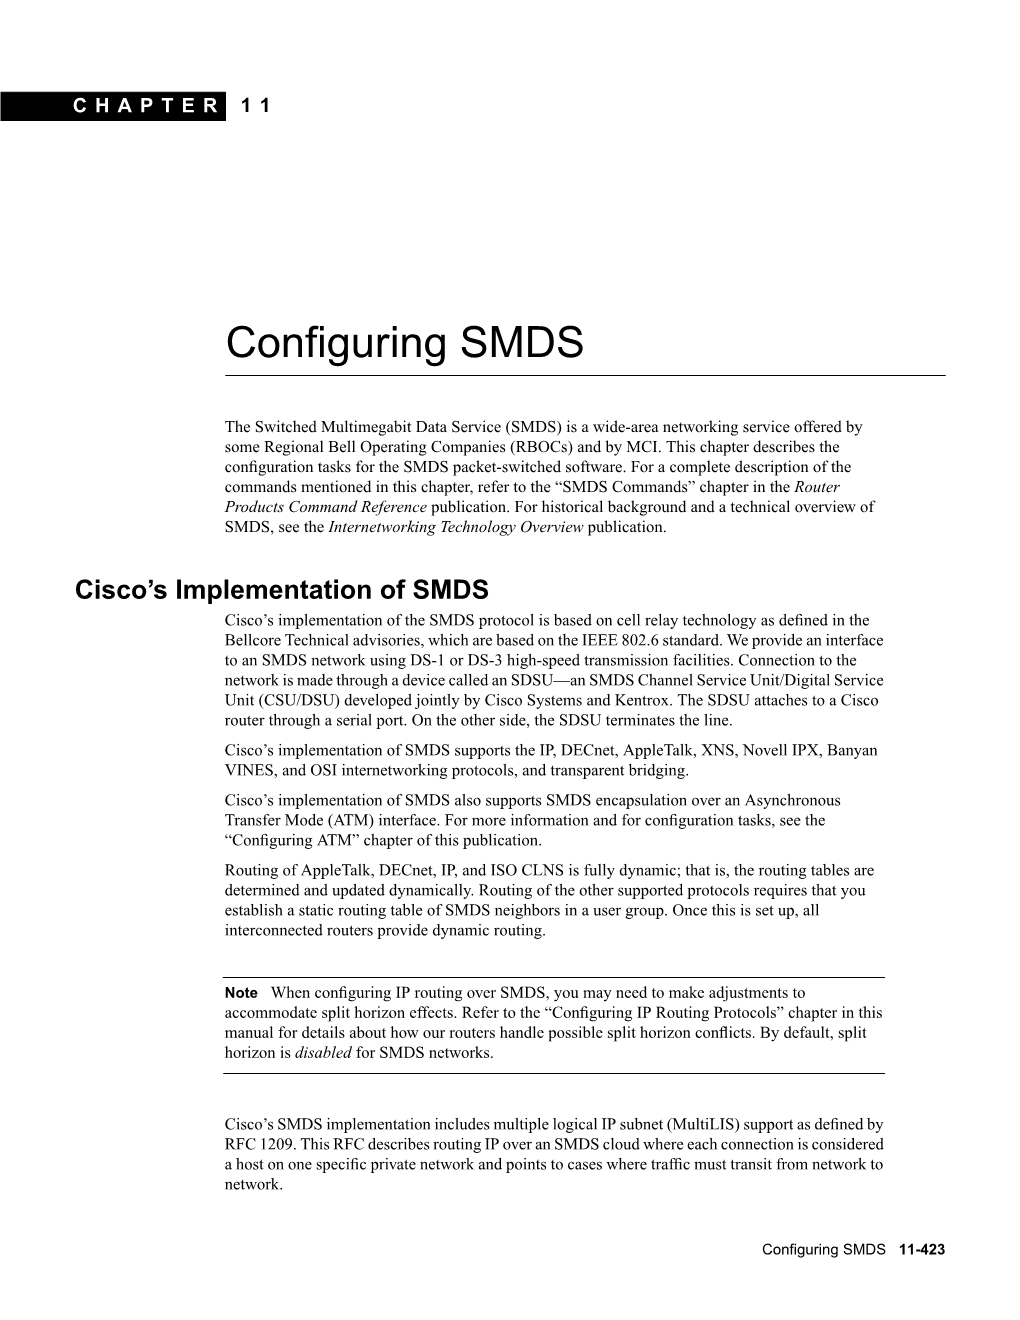 Configuring SMDS